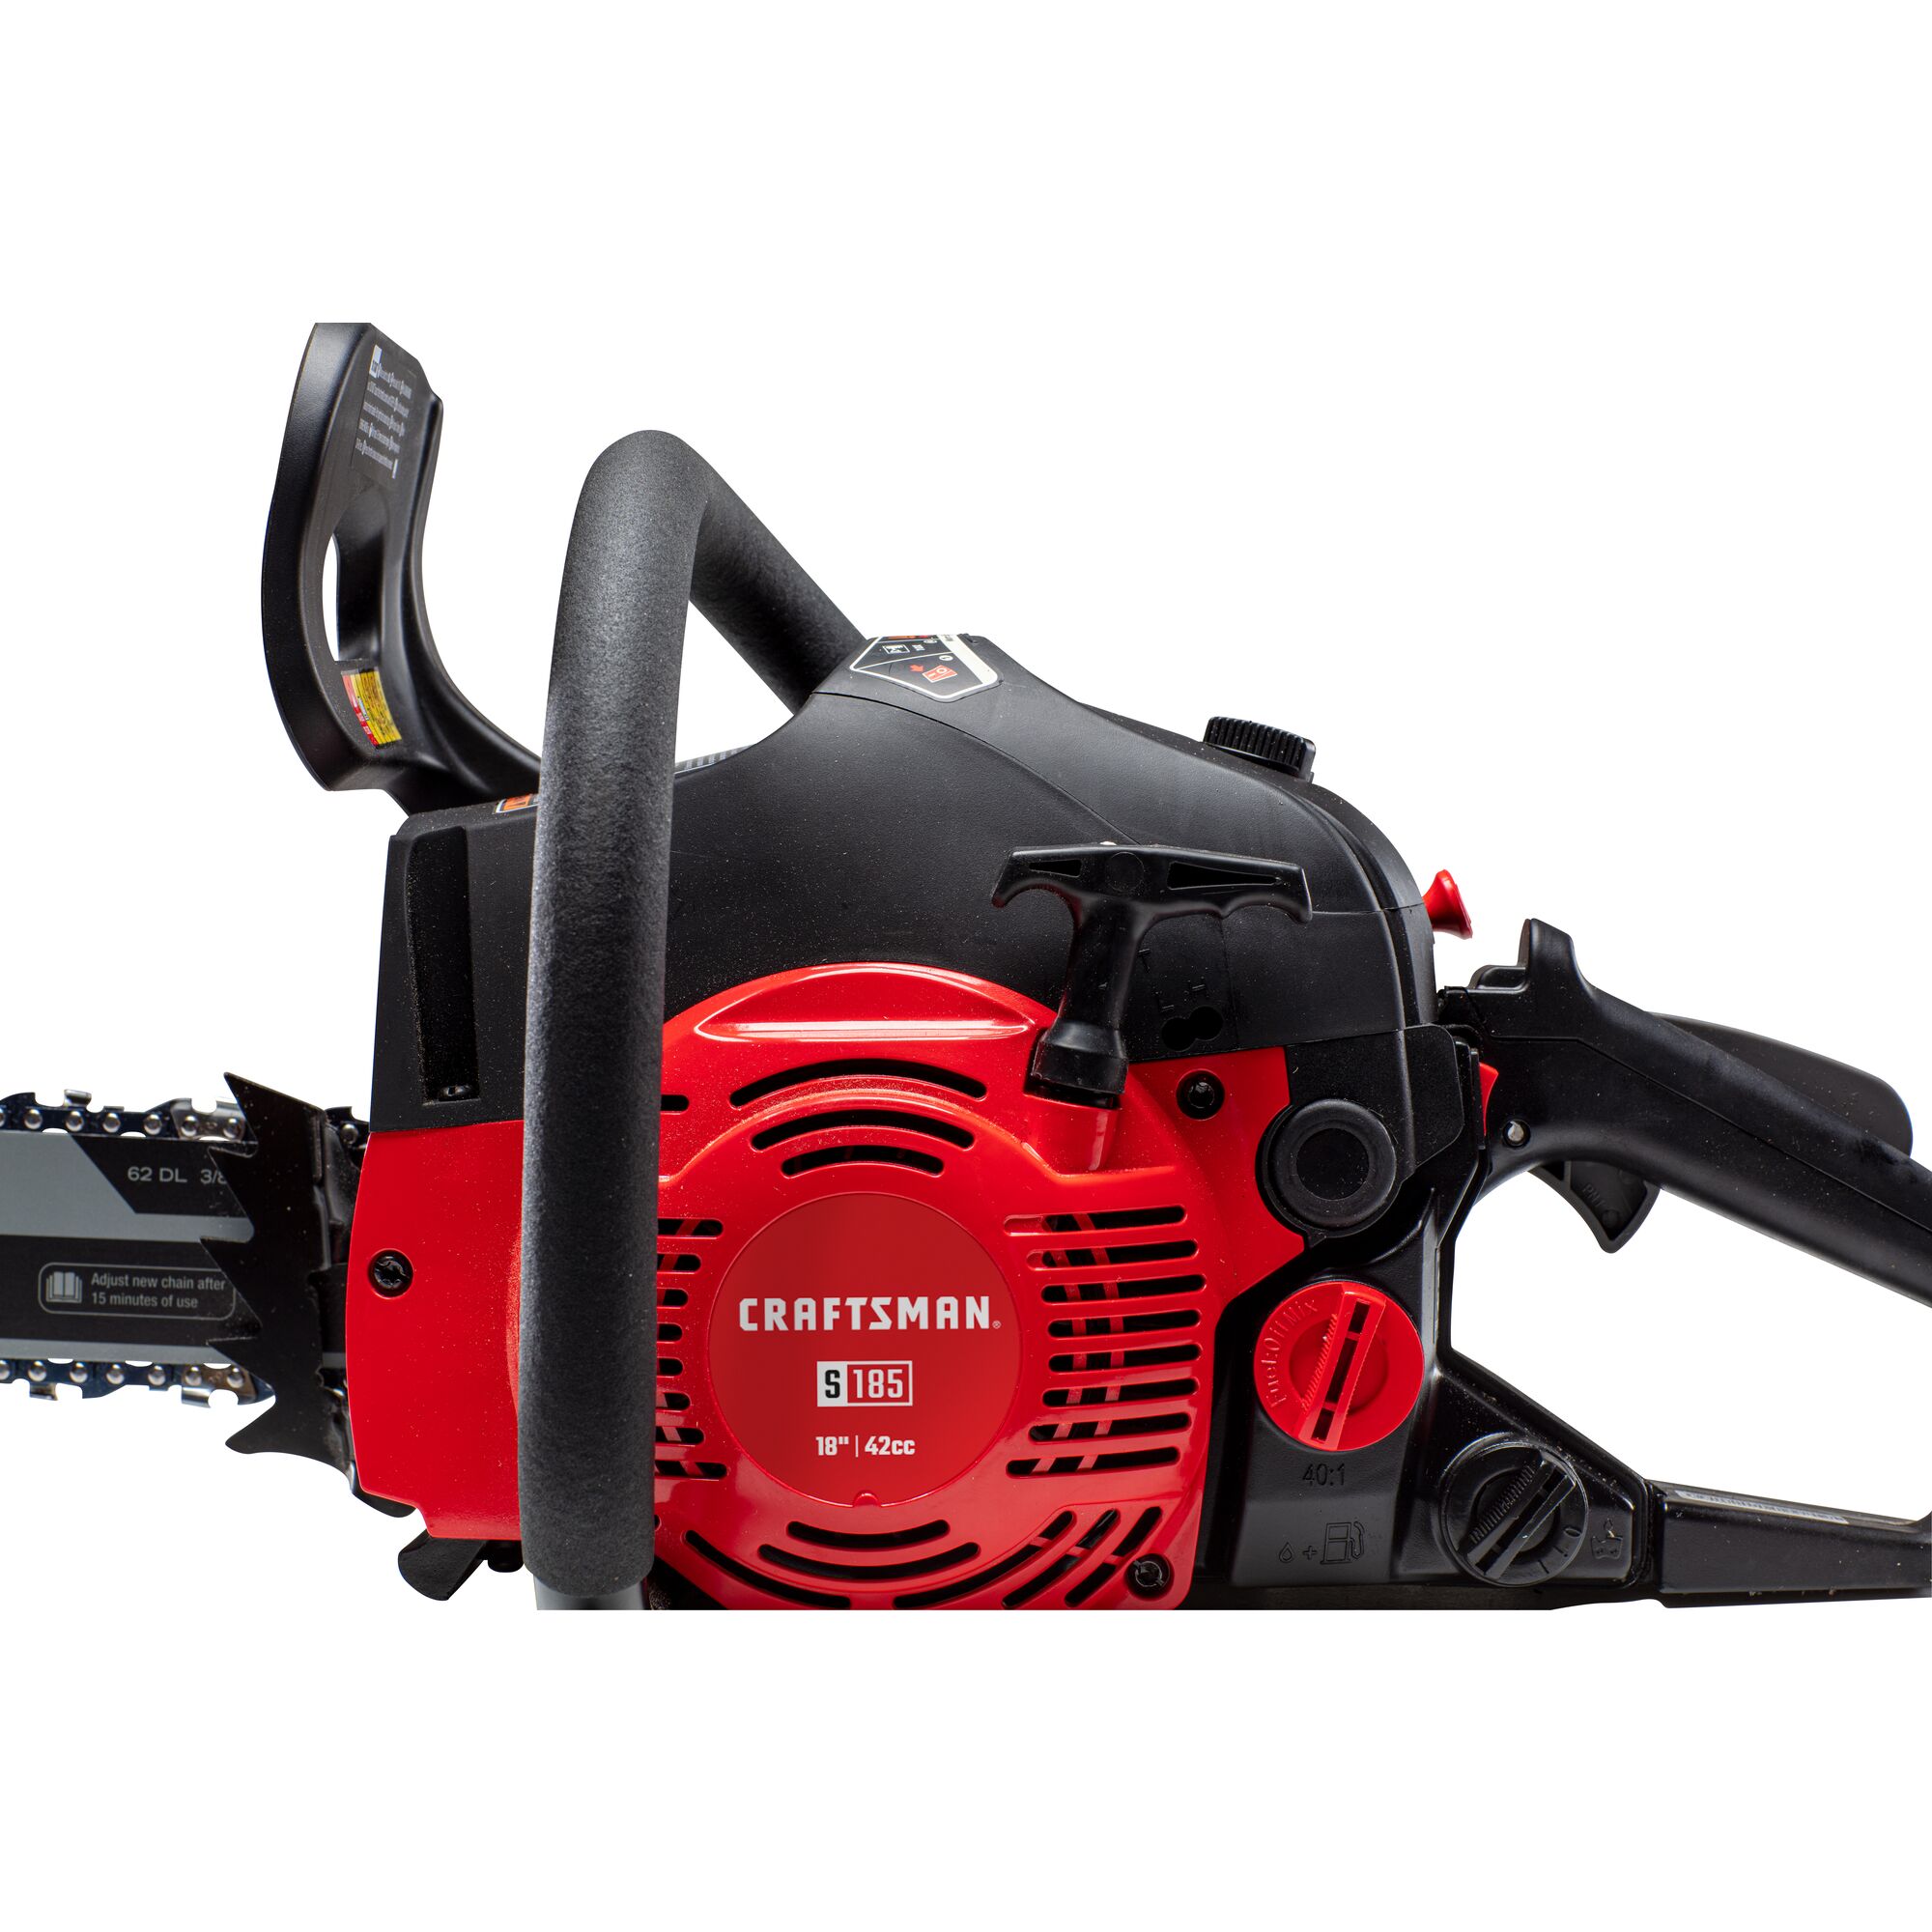 Close up of CRAFTSMAN S185 Gas Chainsaw on white background